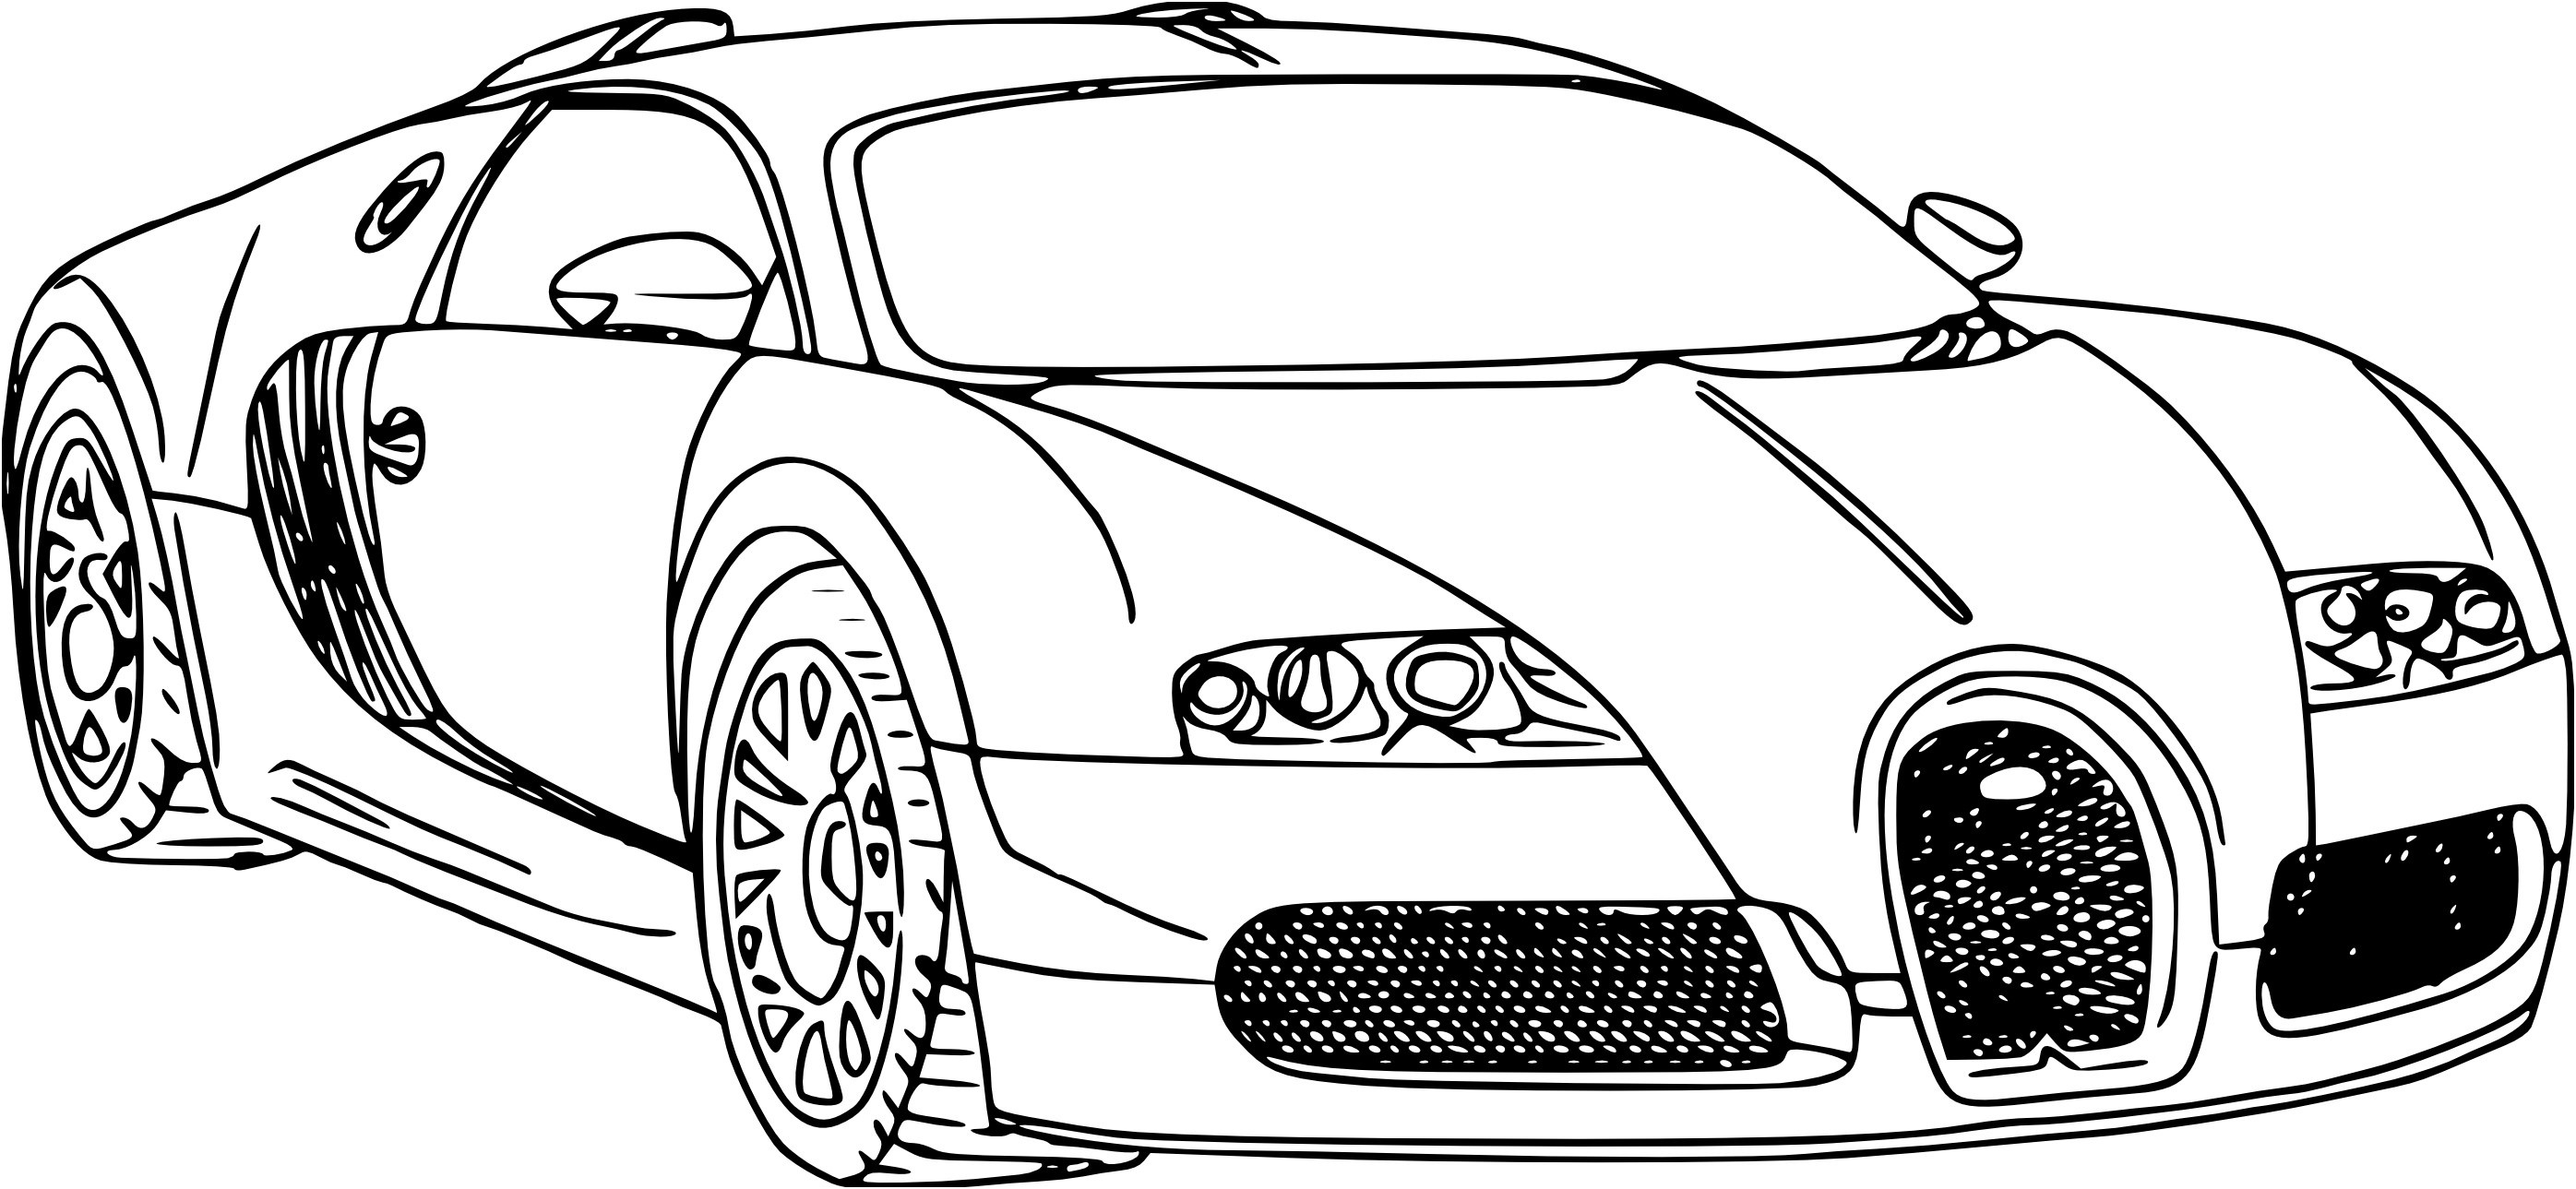 Coloriage Voiture Fast And Furious Frais Lovely Coloriage Voiture Fast And Furious All Dessin De